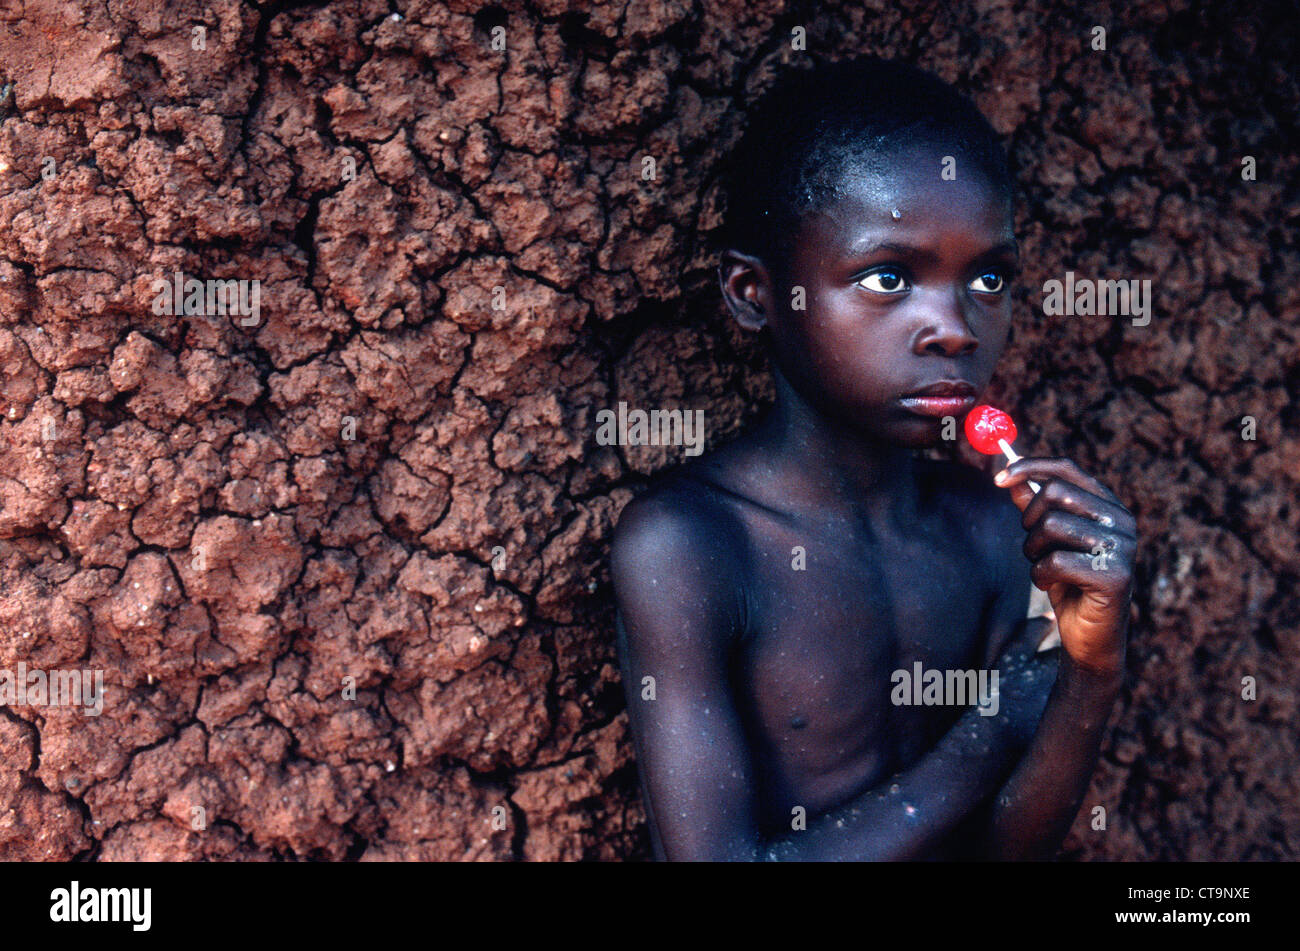 Swaziland portrait of a boy who is suffering from AIDS Stock Photo